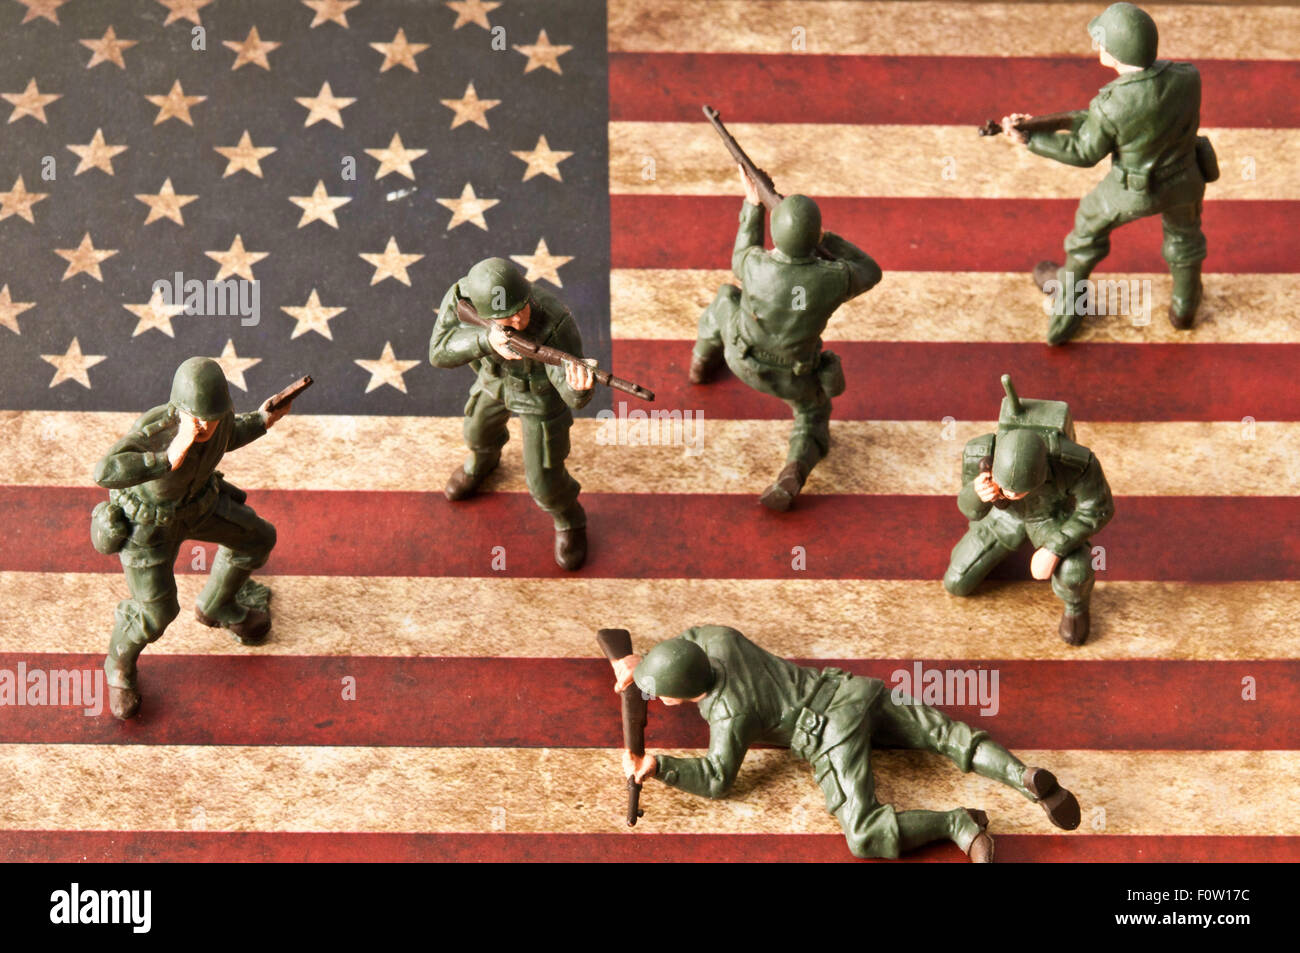 US troops toy soldiers replica of WWII and American flag, Memorial Day concept Stock Photo